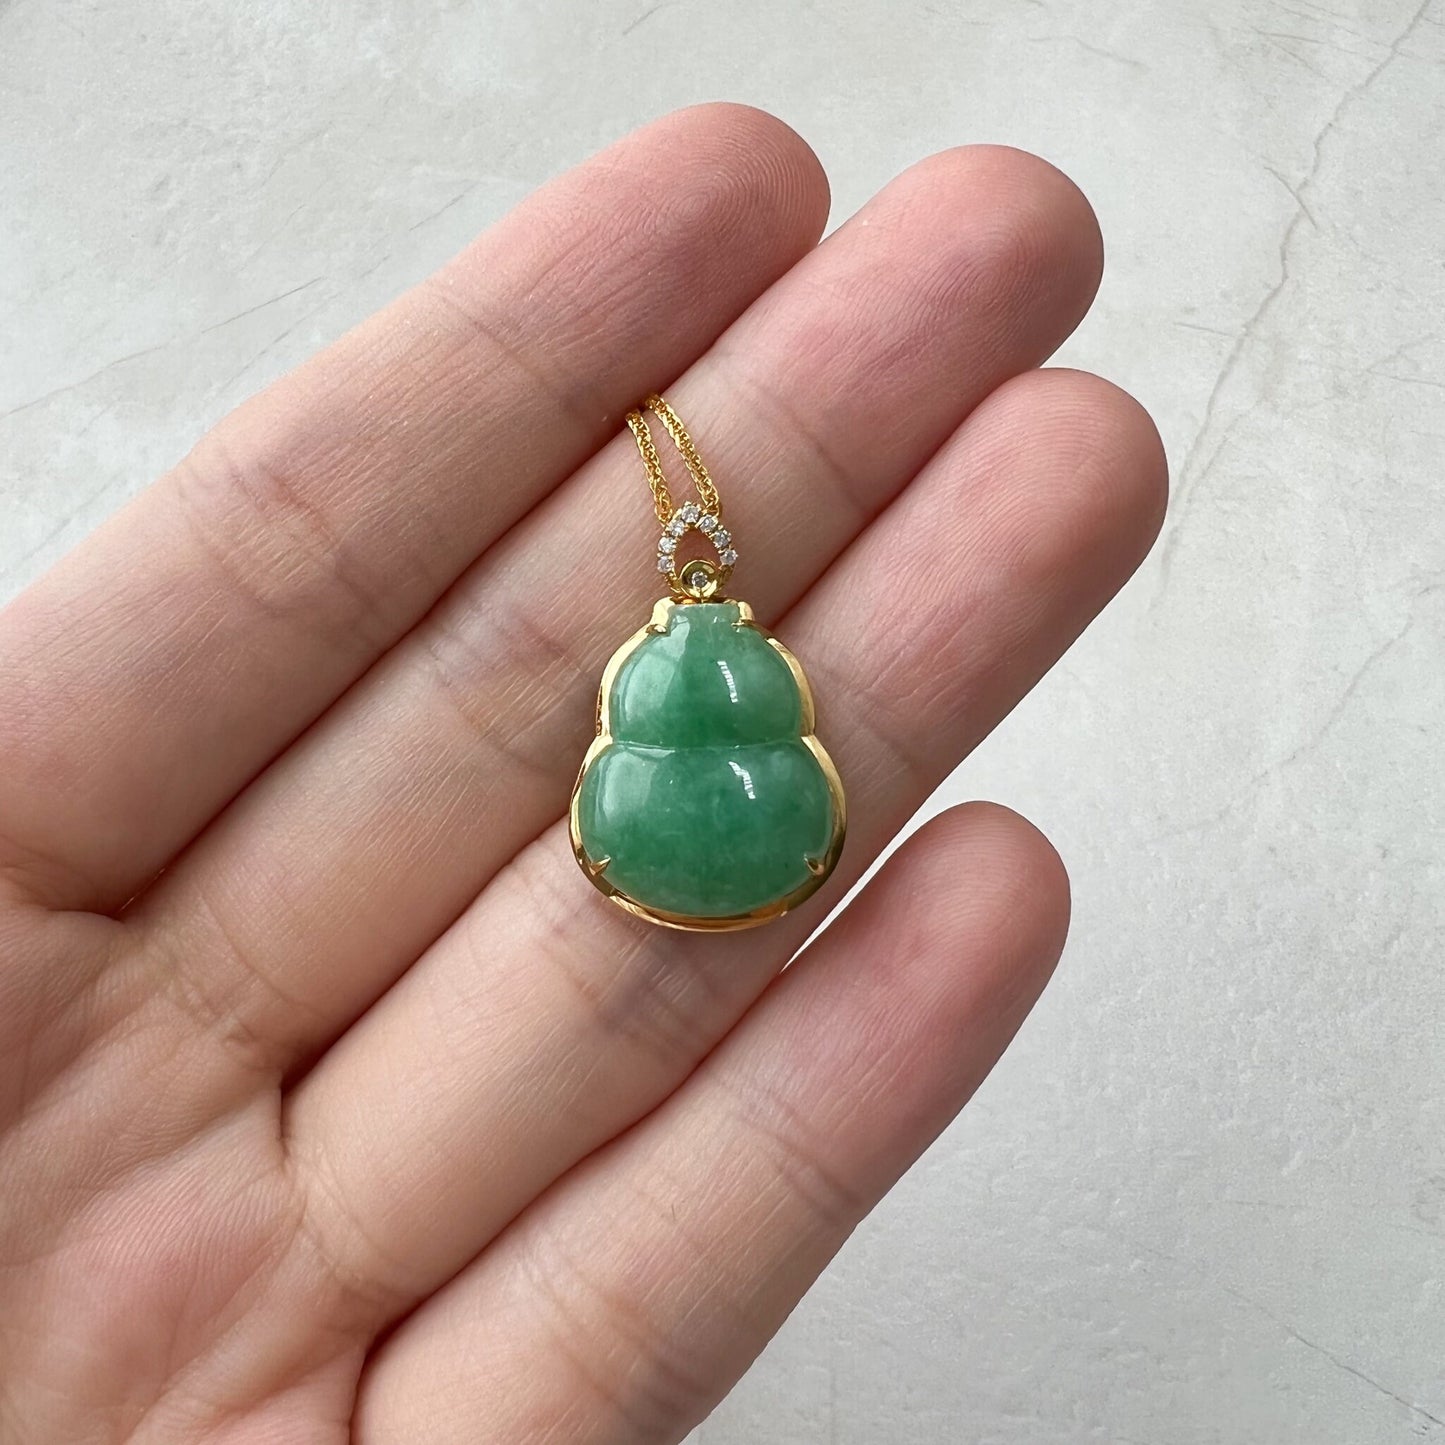 Jade Bottle Gourd, Jadeite Jade, 18K Gold Set, Calabash, Small and Dainty, Hand Carved Pendant Necklace, FSX-0921-KSA32457 - AriaDesignCollection